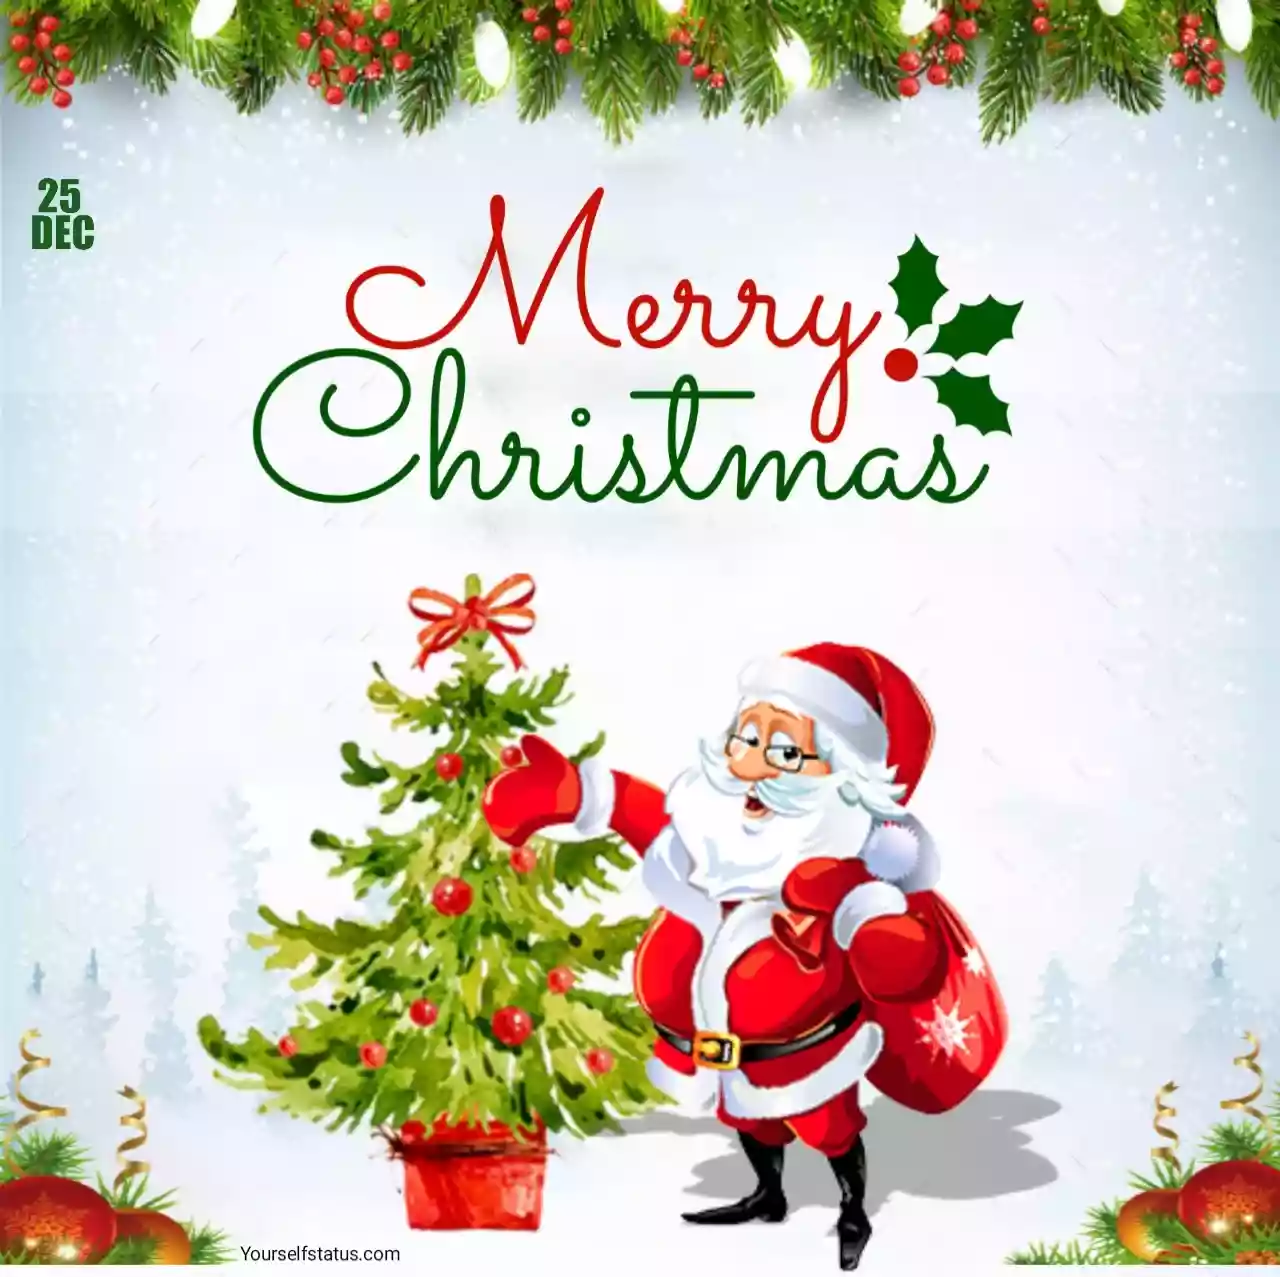 Christmas wishes images in english